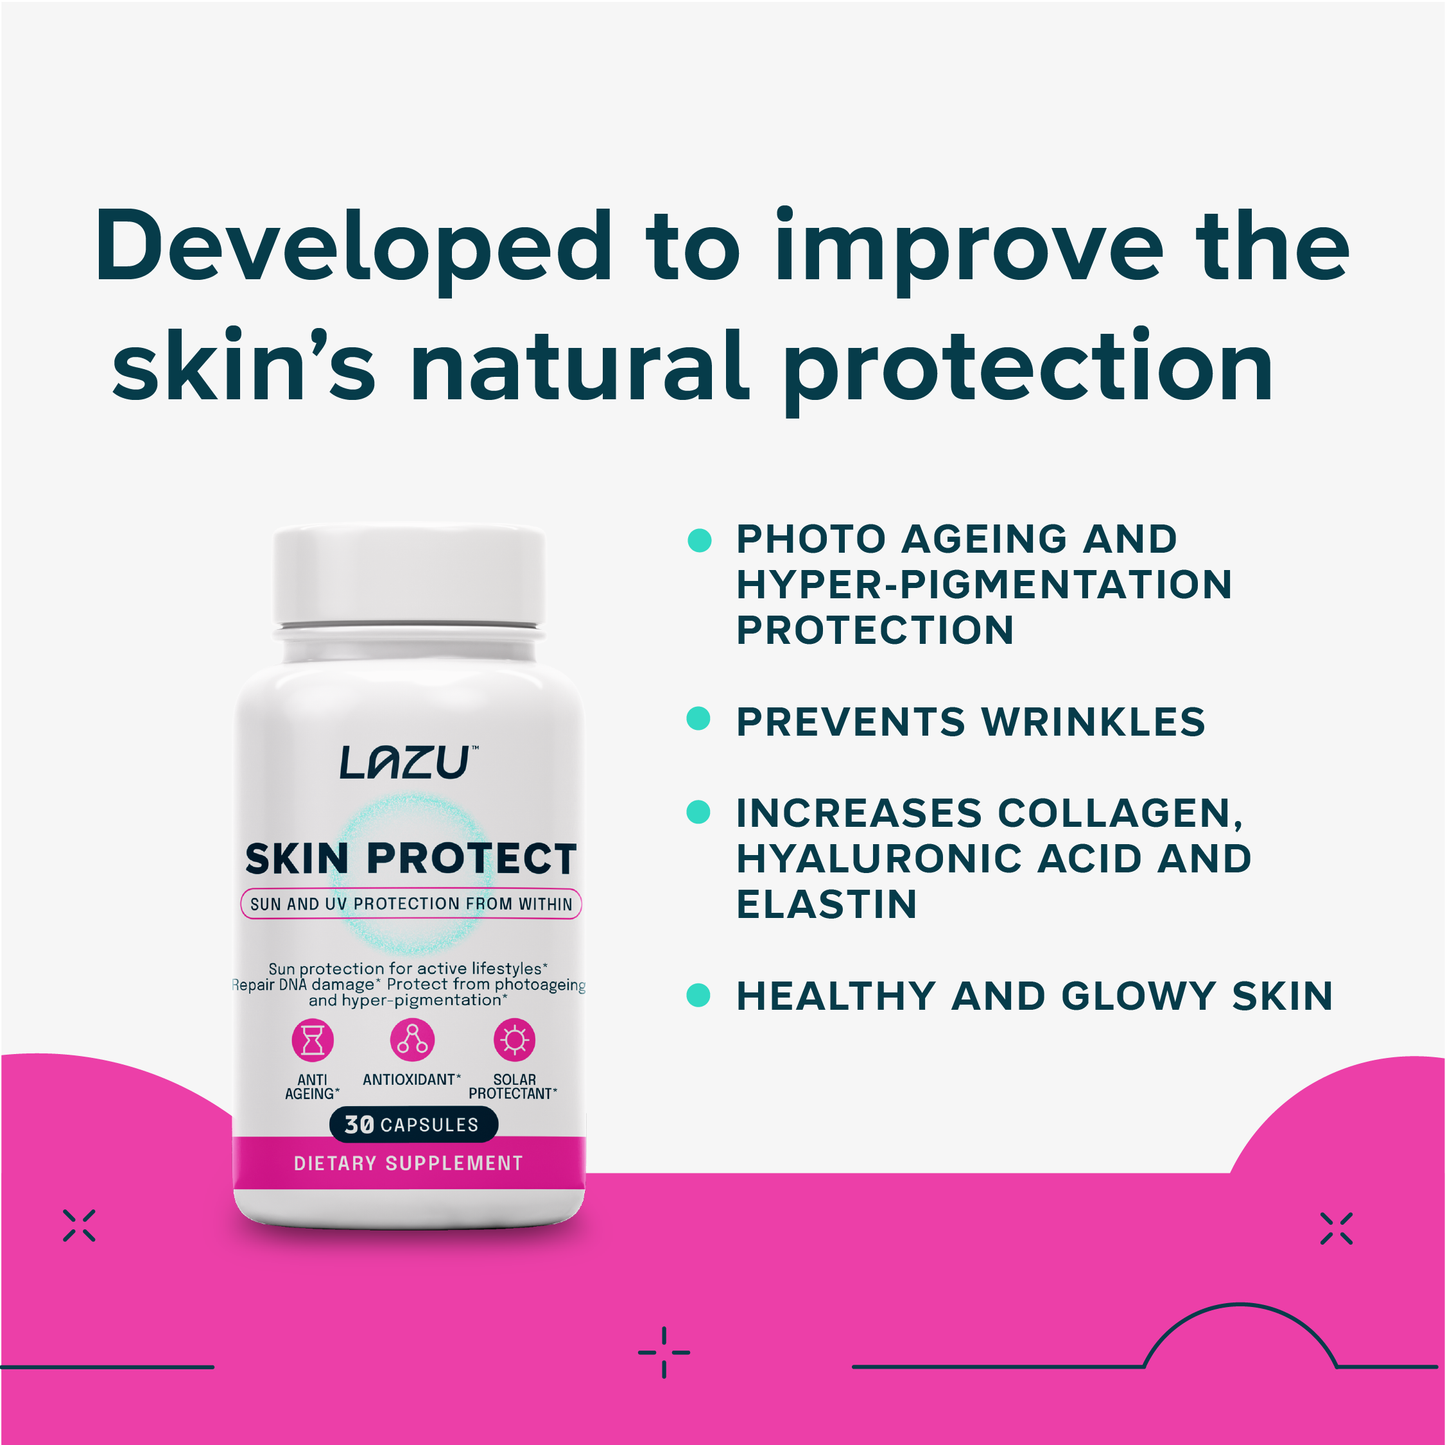 SKIN PROTECT - Sun and UV protection from within